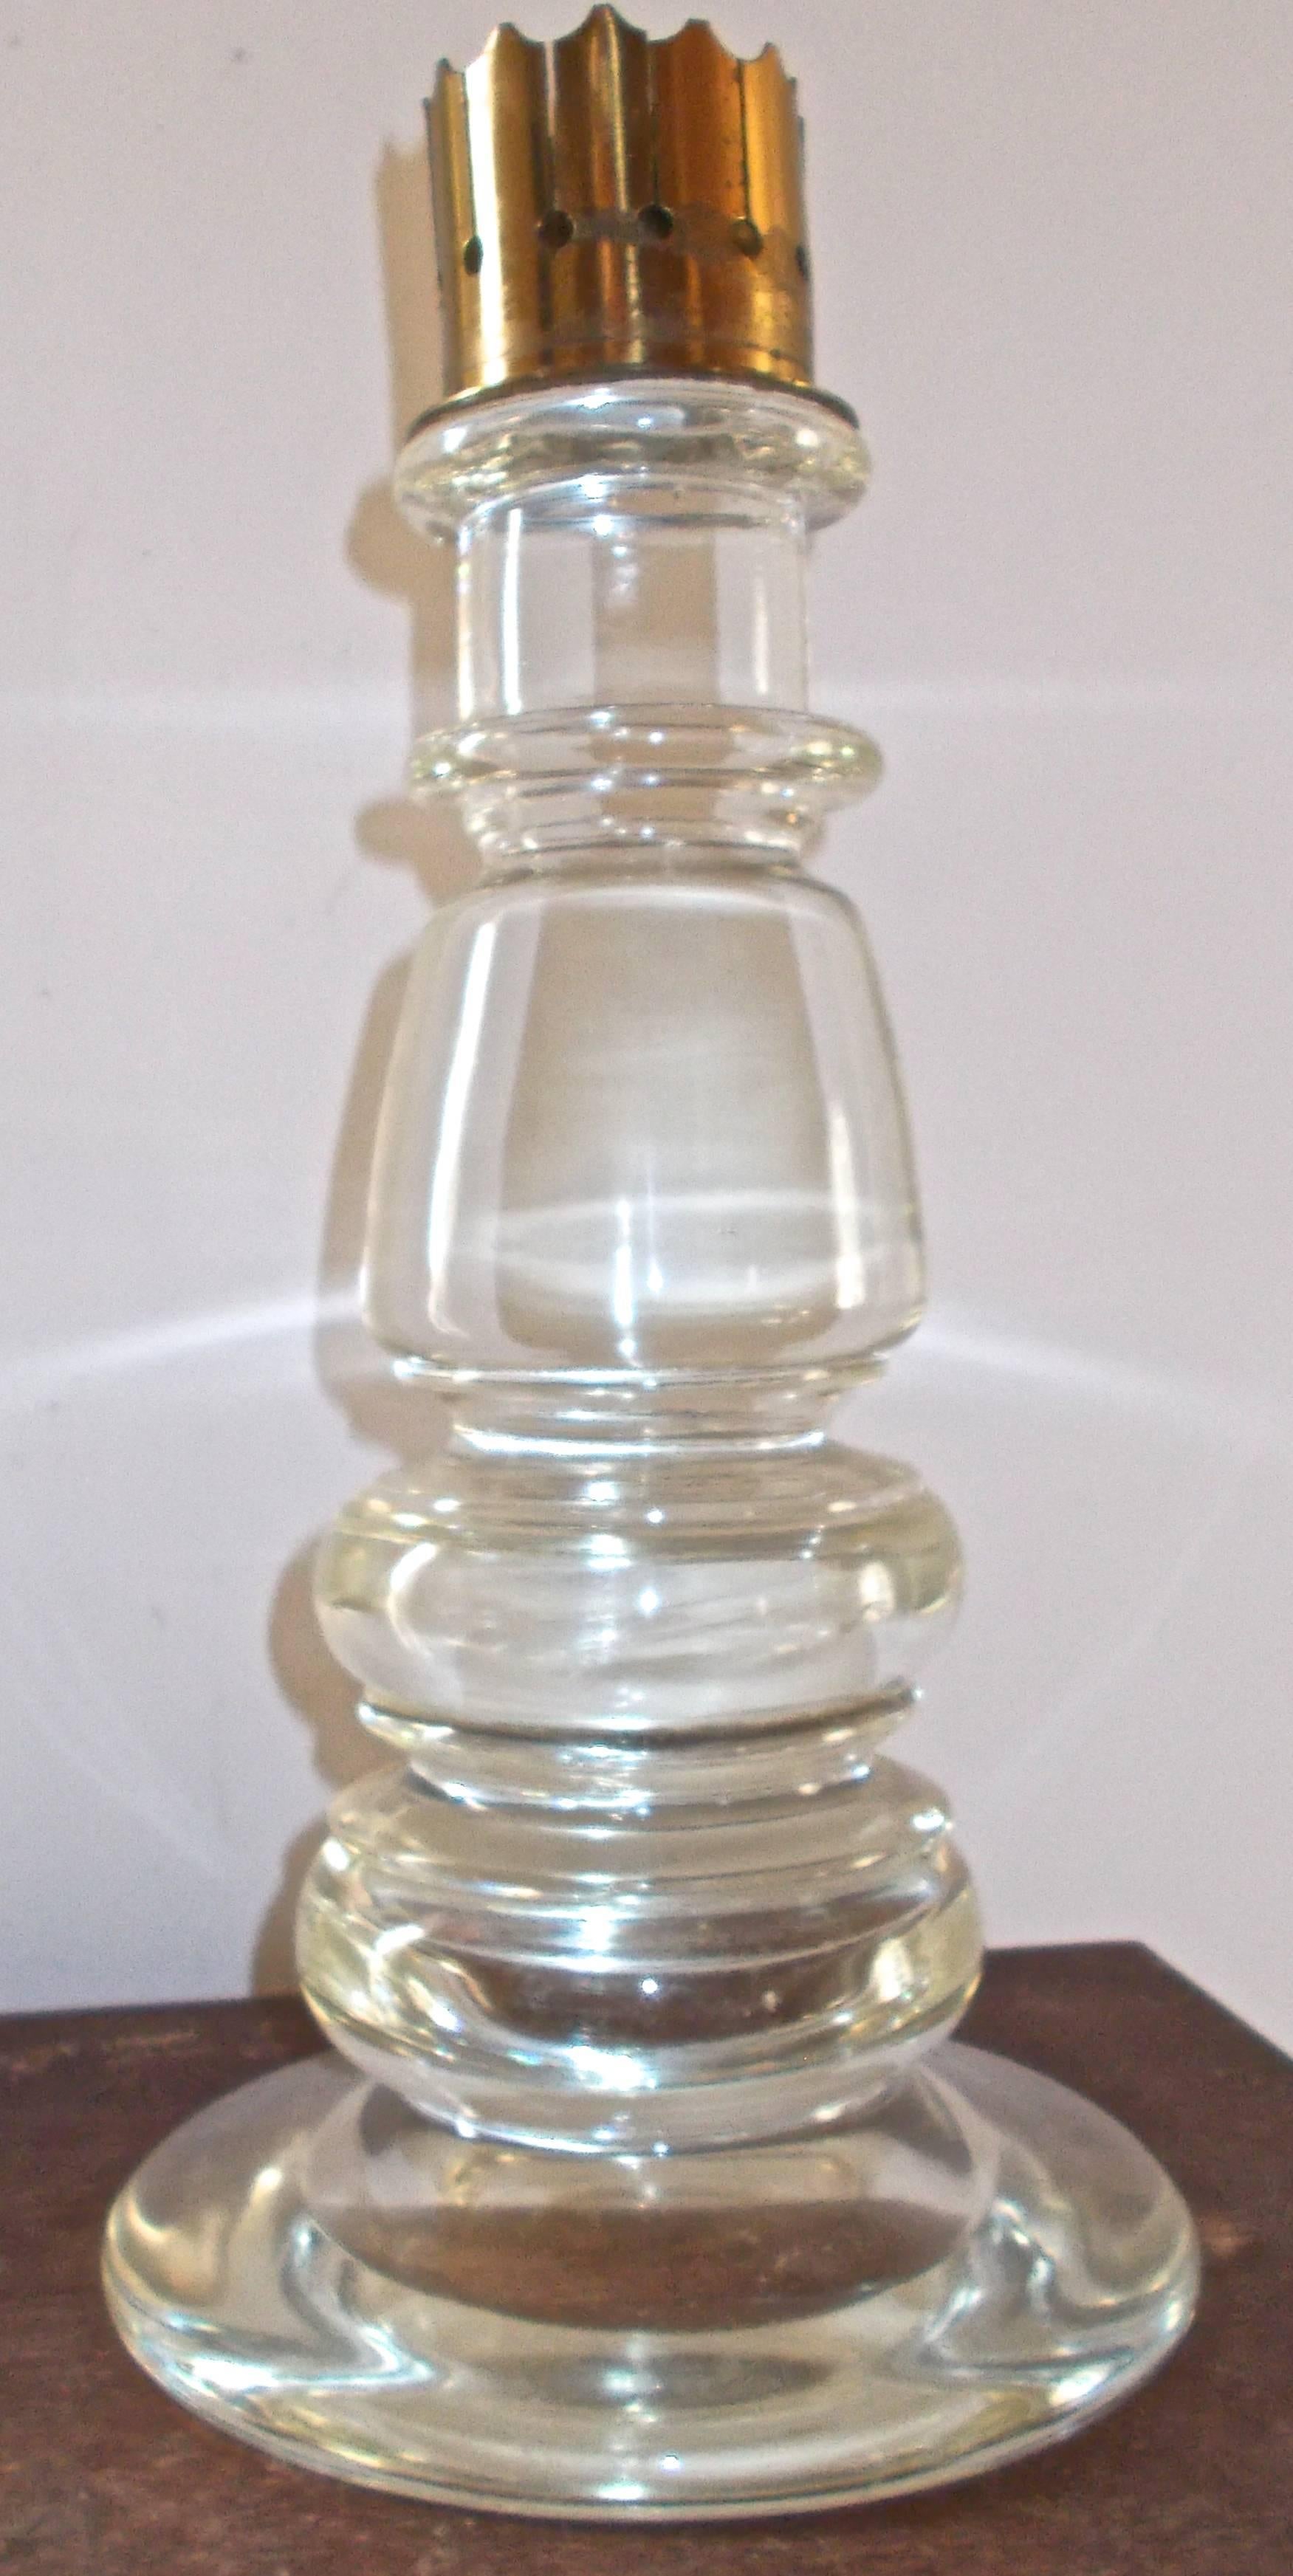 A large clear glass candlestick composed of circular 'turnings', topped with a brass bobeche. Unsigned with a cleaned pontil. Measures: H. 35.5 cm., D. 19 cm.